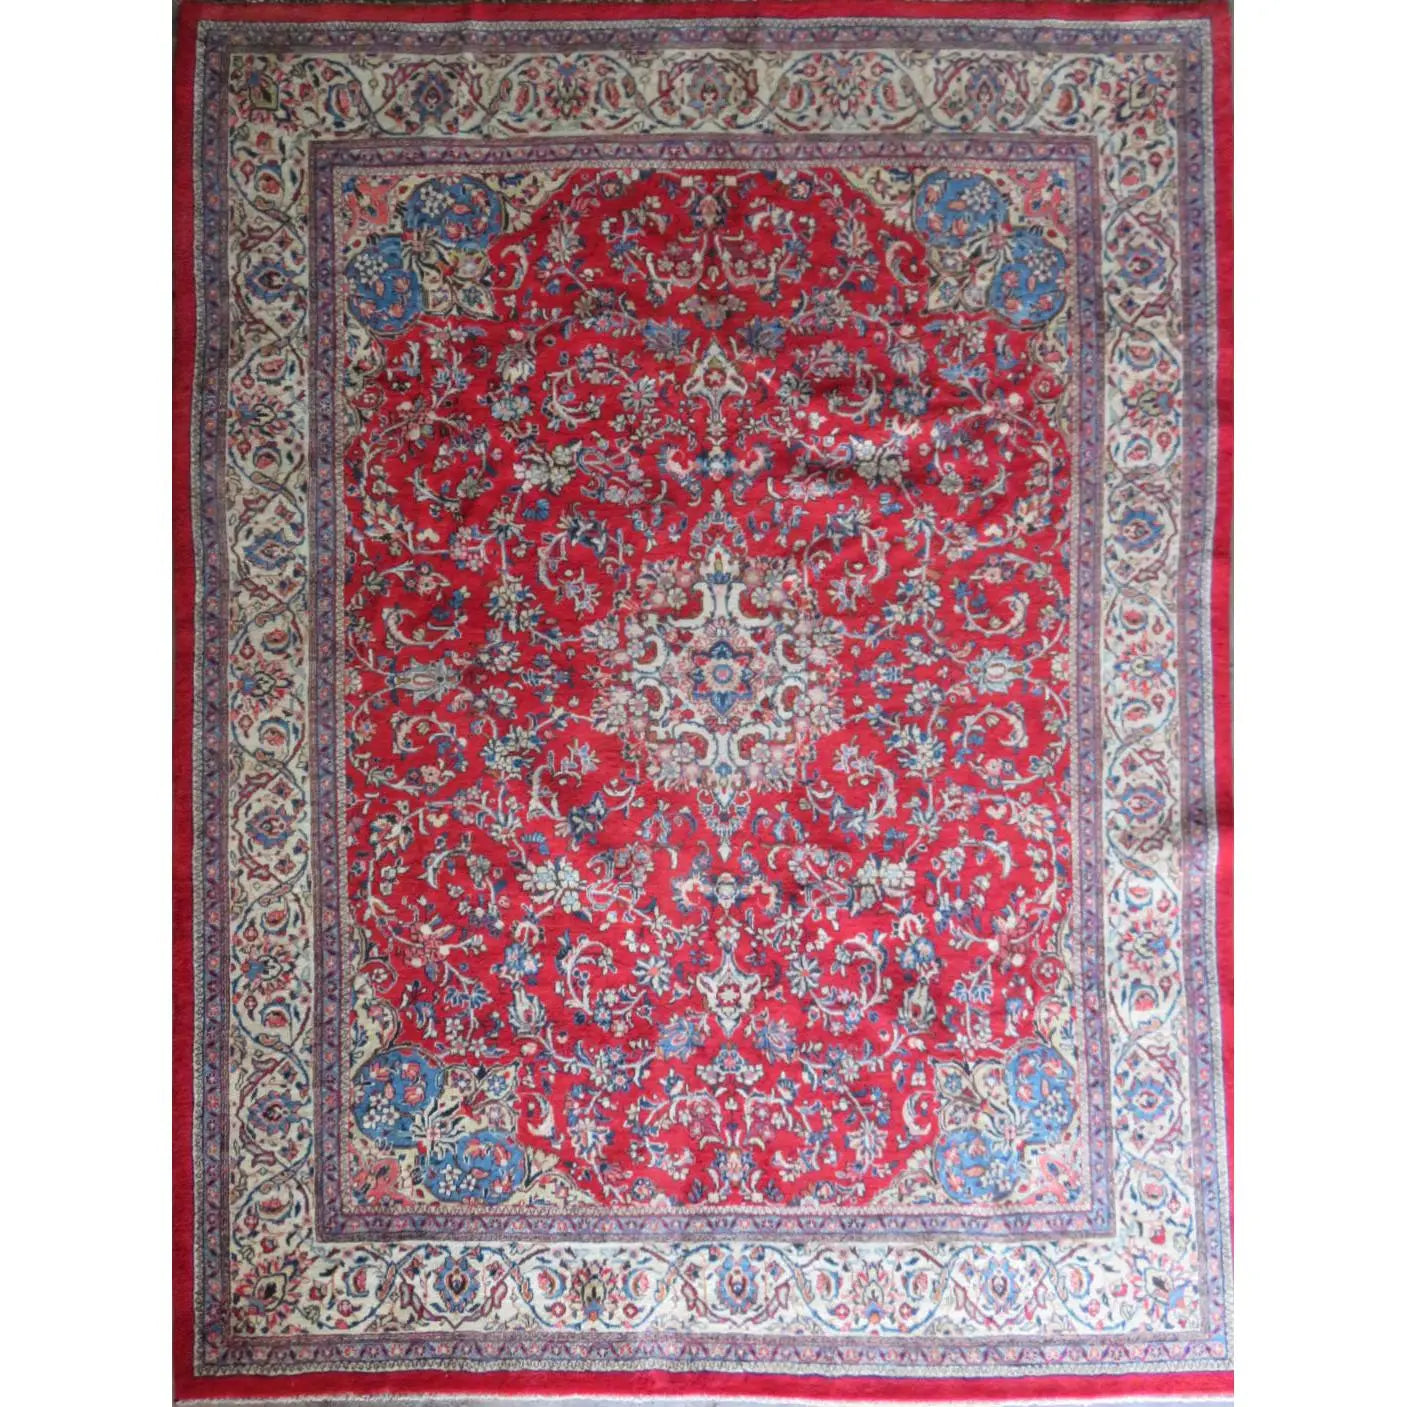 Hand-Knotted Persian Wool Rug _ Luxurious Vintage Design, 12'9" x 9'6", Artisan Crafted